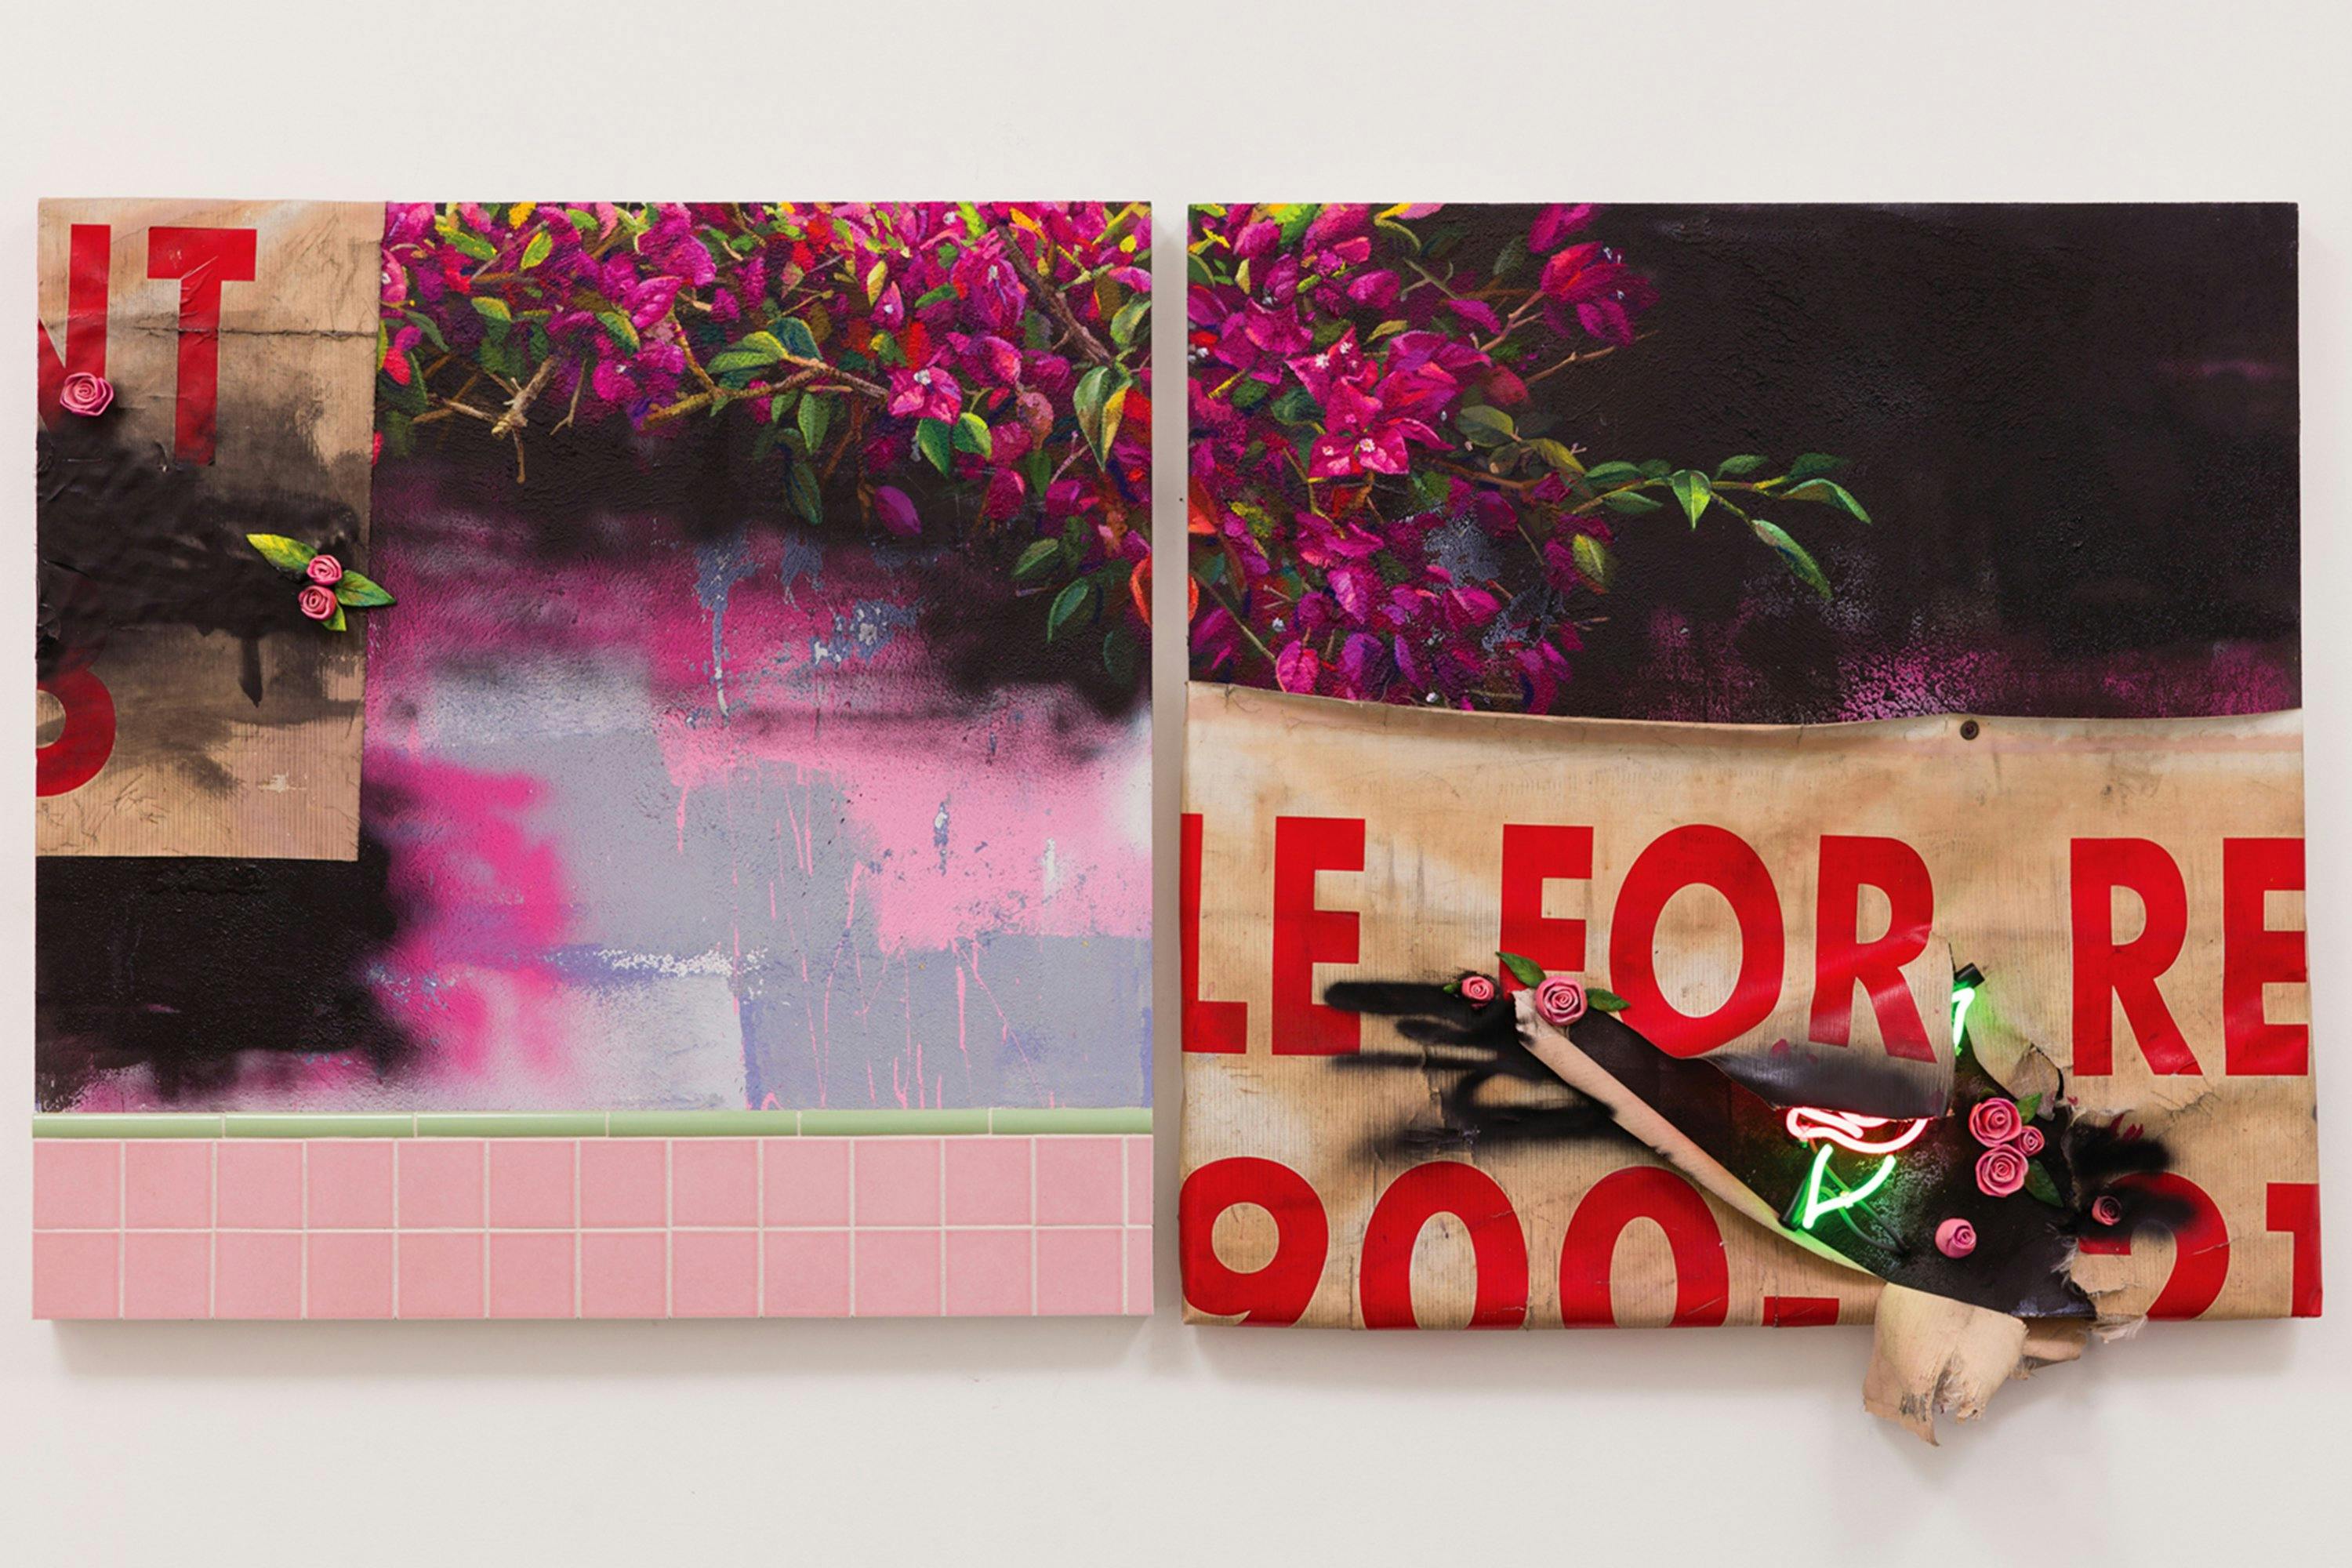 LANDSCAPE FOR LEASE (DIPTYCH) CERAMIC, FOUND BANNER TARP, CERAMIC TILE, MIXED MEDIA ON STUCCO AND NEON ON PANEL, 2017